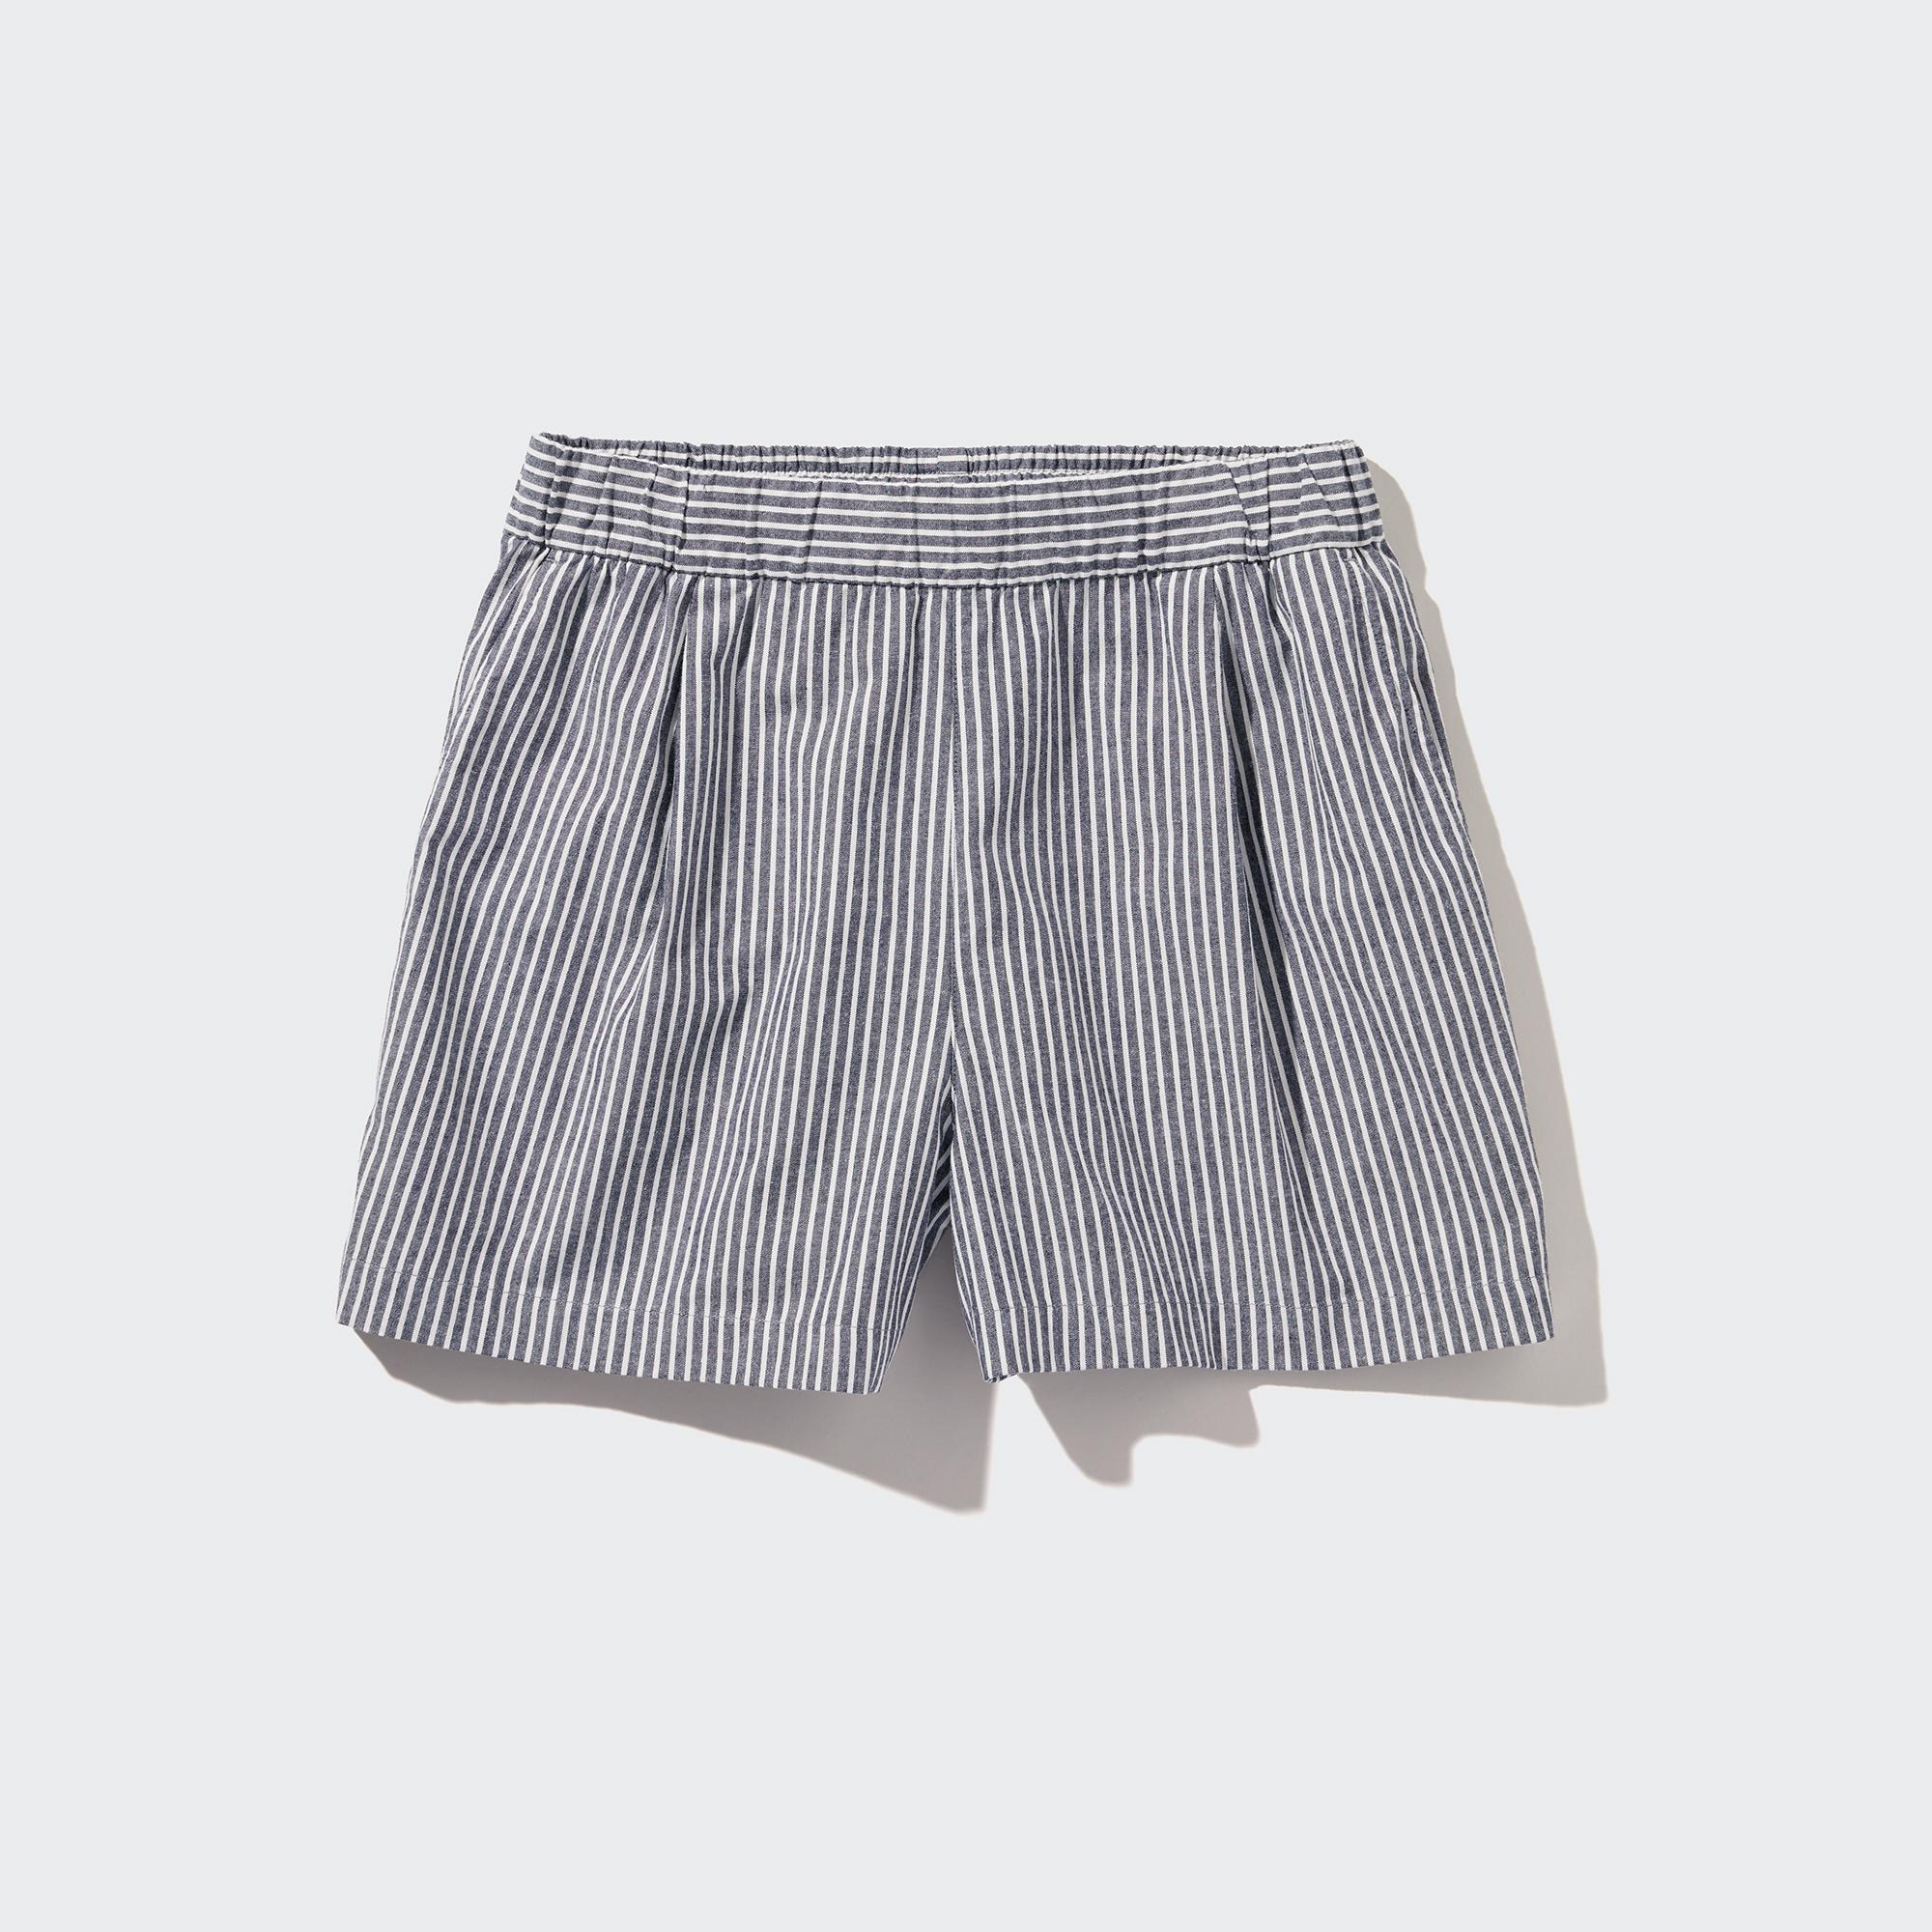 COTTON EASY SHORTS (STRIPED)